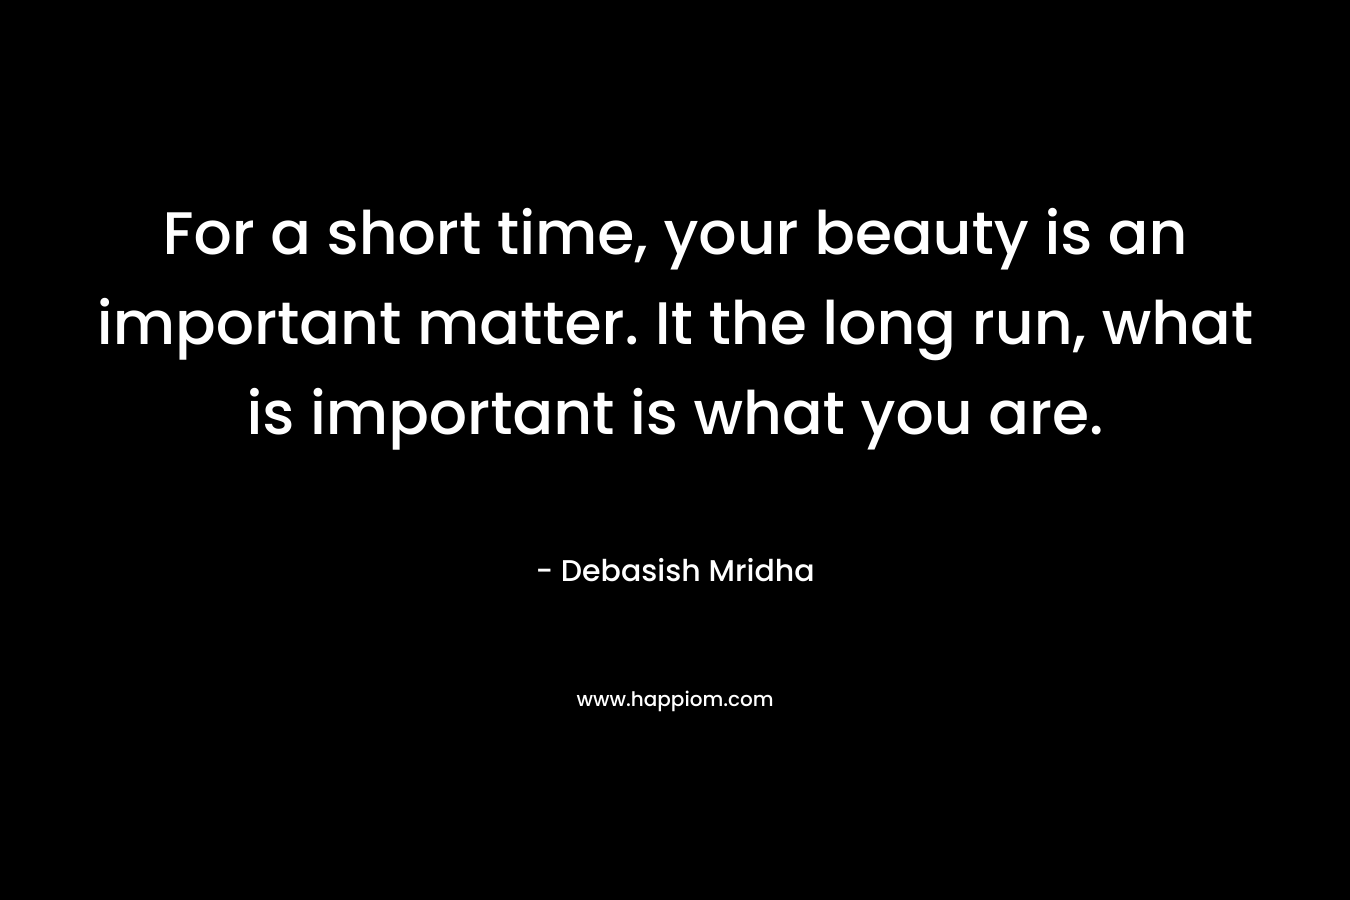 For a short time, your beauty is an important matter. It the long run, what is important is what you are.